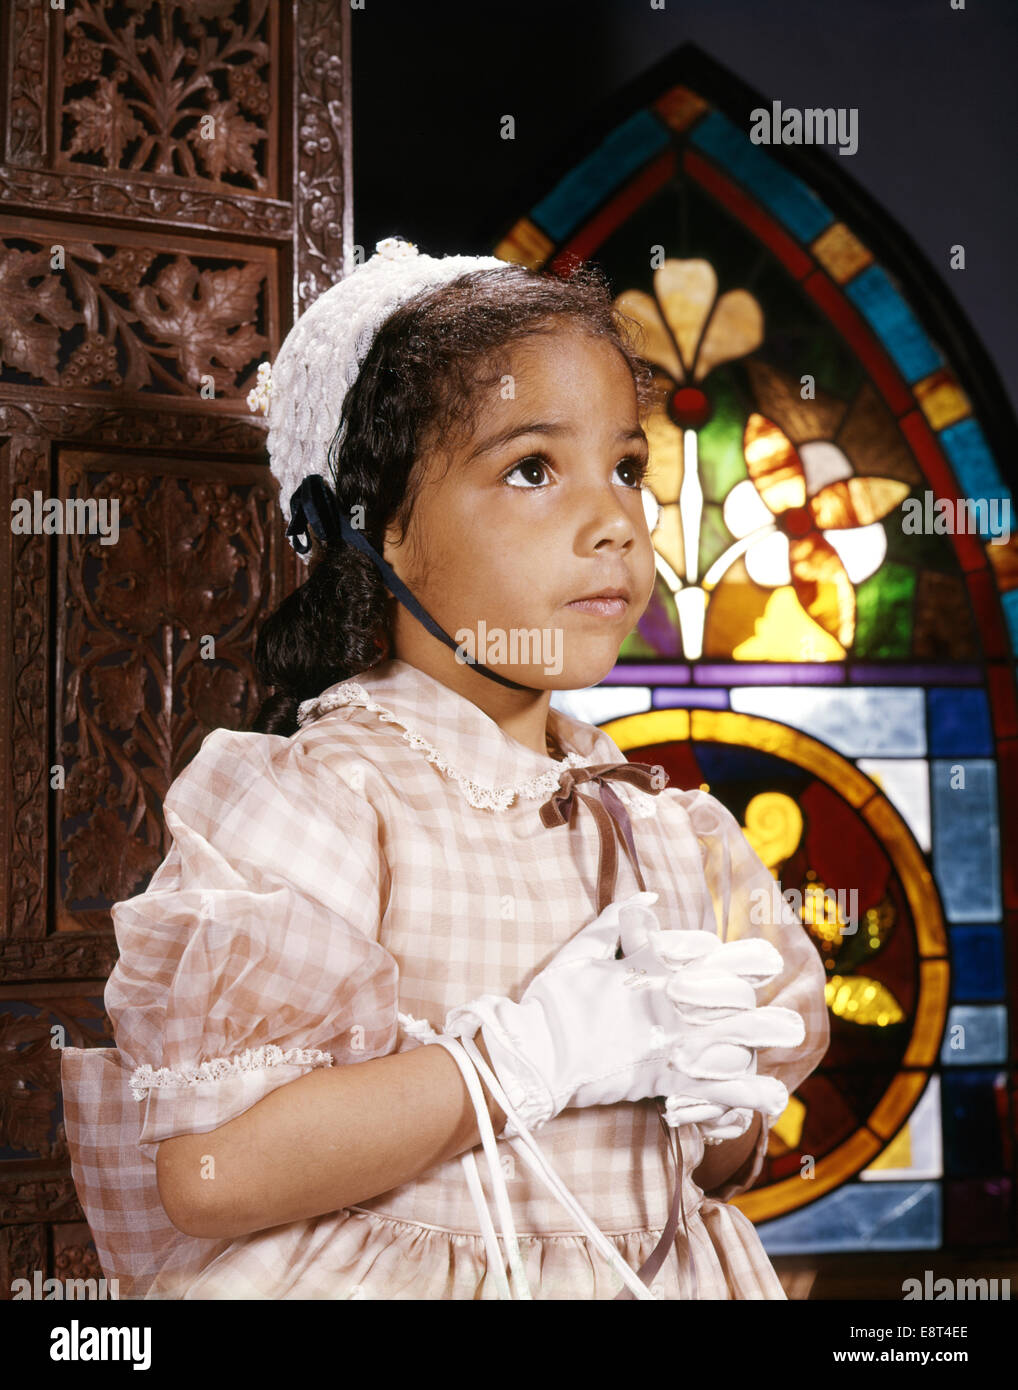 1960s AFRICAN AMERICAN GIRL IN CHURCH BY STAINED GLASS WINDOW